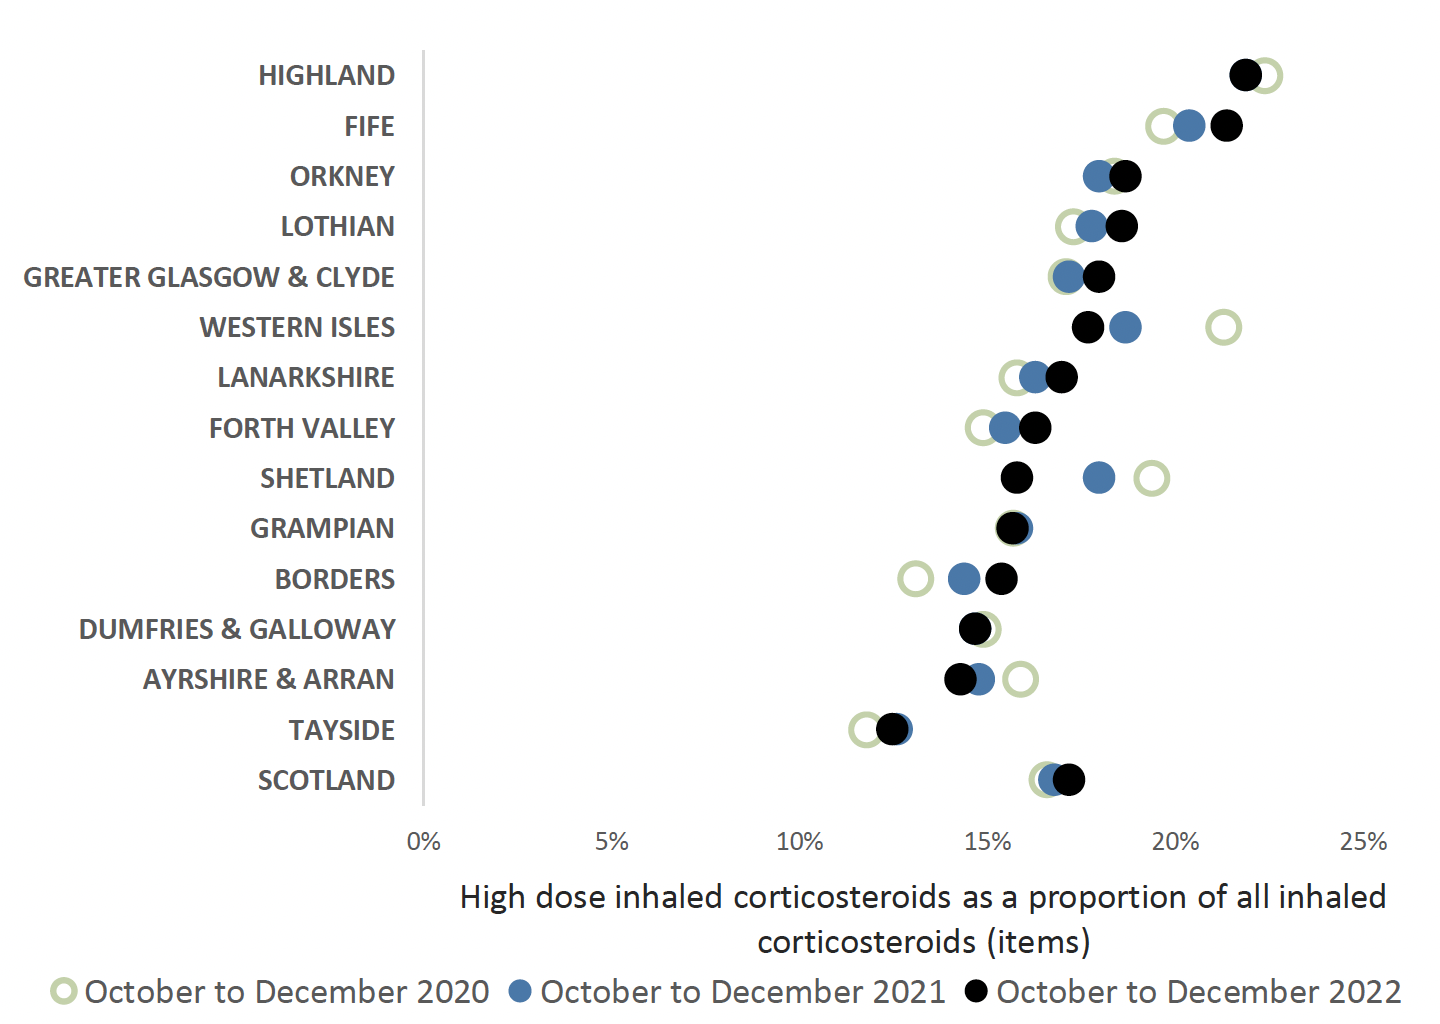 Chart comparing high dose corticosteroid inhalers as a percentage of all corticosteroid inhaler items between health boards and Scotland in 2020, 2021 and 2022. Overall Scotland trend is increasing